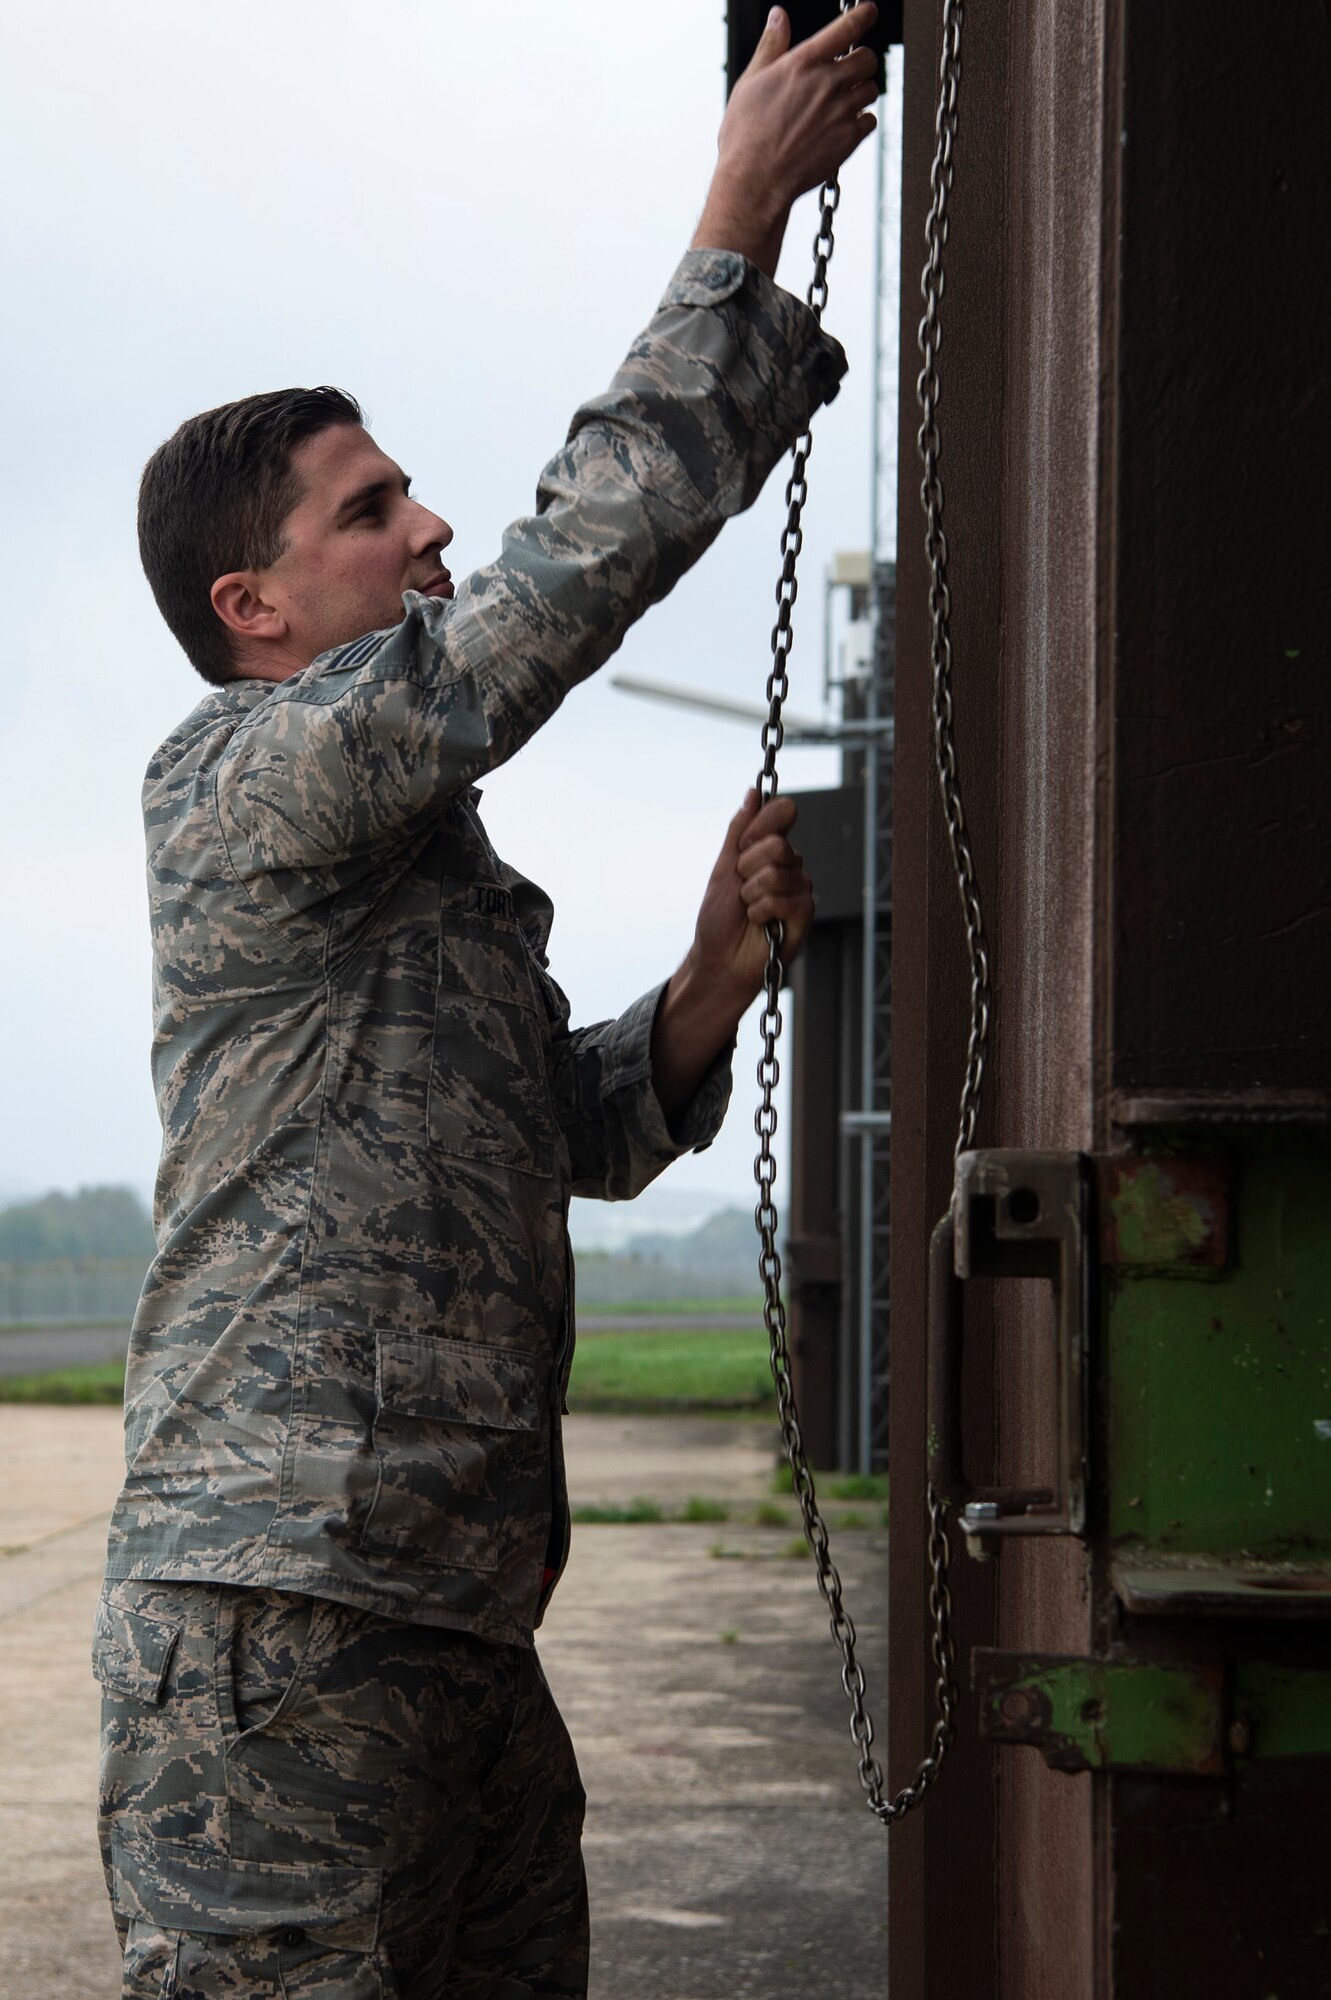 U.S. Air Force Senior Airman Matthew Tortorice, 52nd Maintenance Squadron munitions stockpile crew chief, closes a munitions storage facility at Spangdahlem Air Base, Germany, Oct. 24, 2019. The facility was inspected during a Conventional Armed Forces in Europe Treaty exercise. The treaty limits the amount of certain equipment that each participating state party can have within the European Area of Application. (U.S. Air Force photo by Airman 1st Class Valerie Seelye)